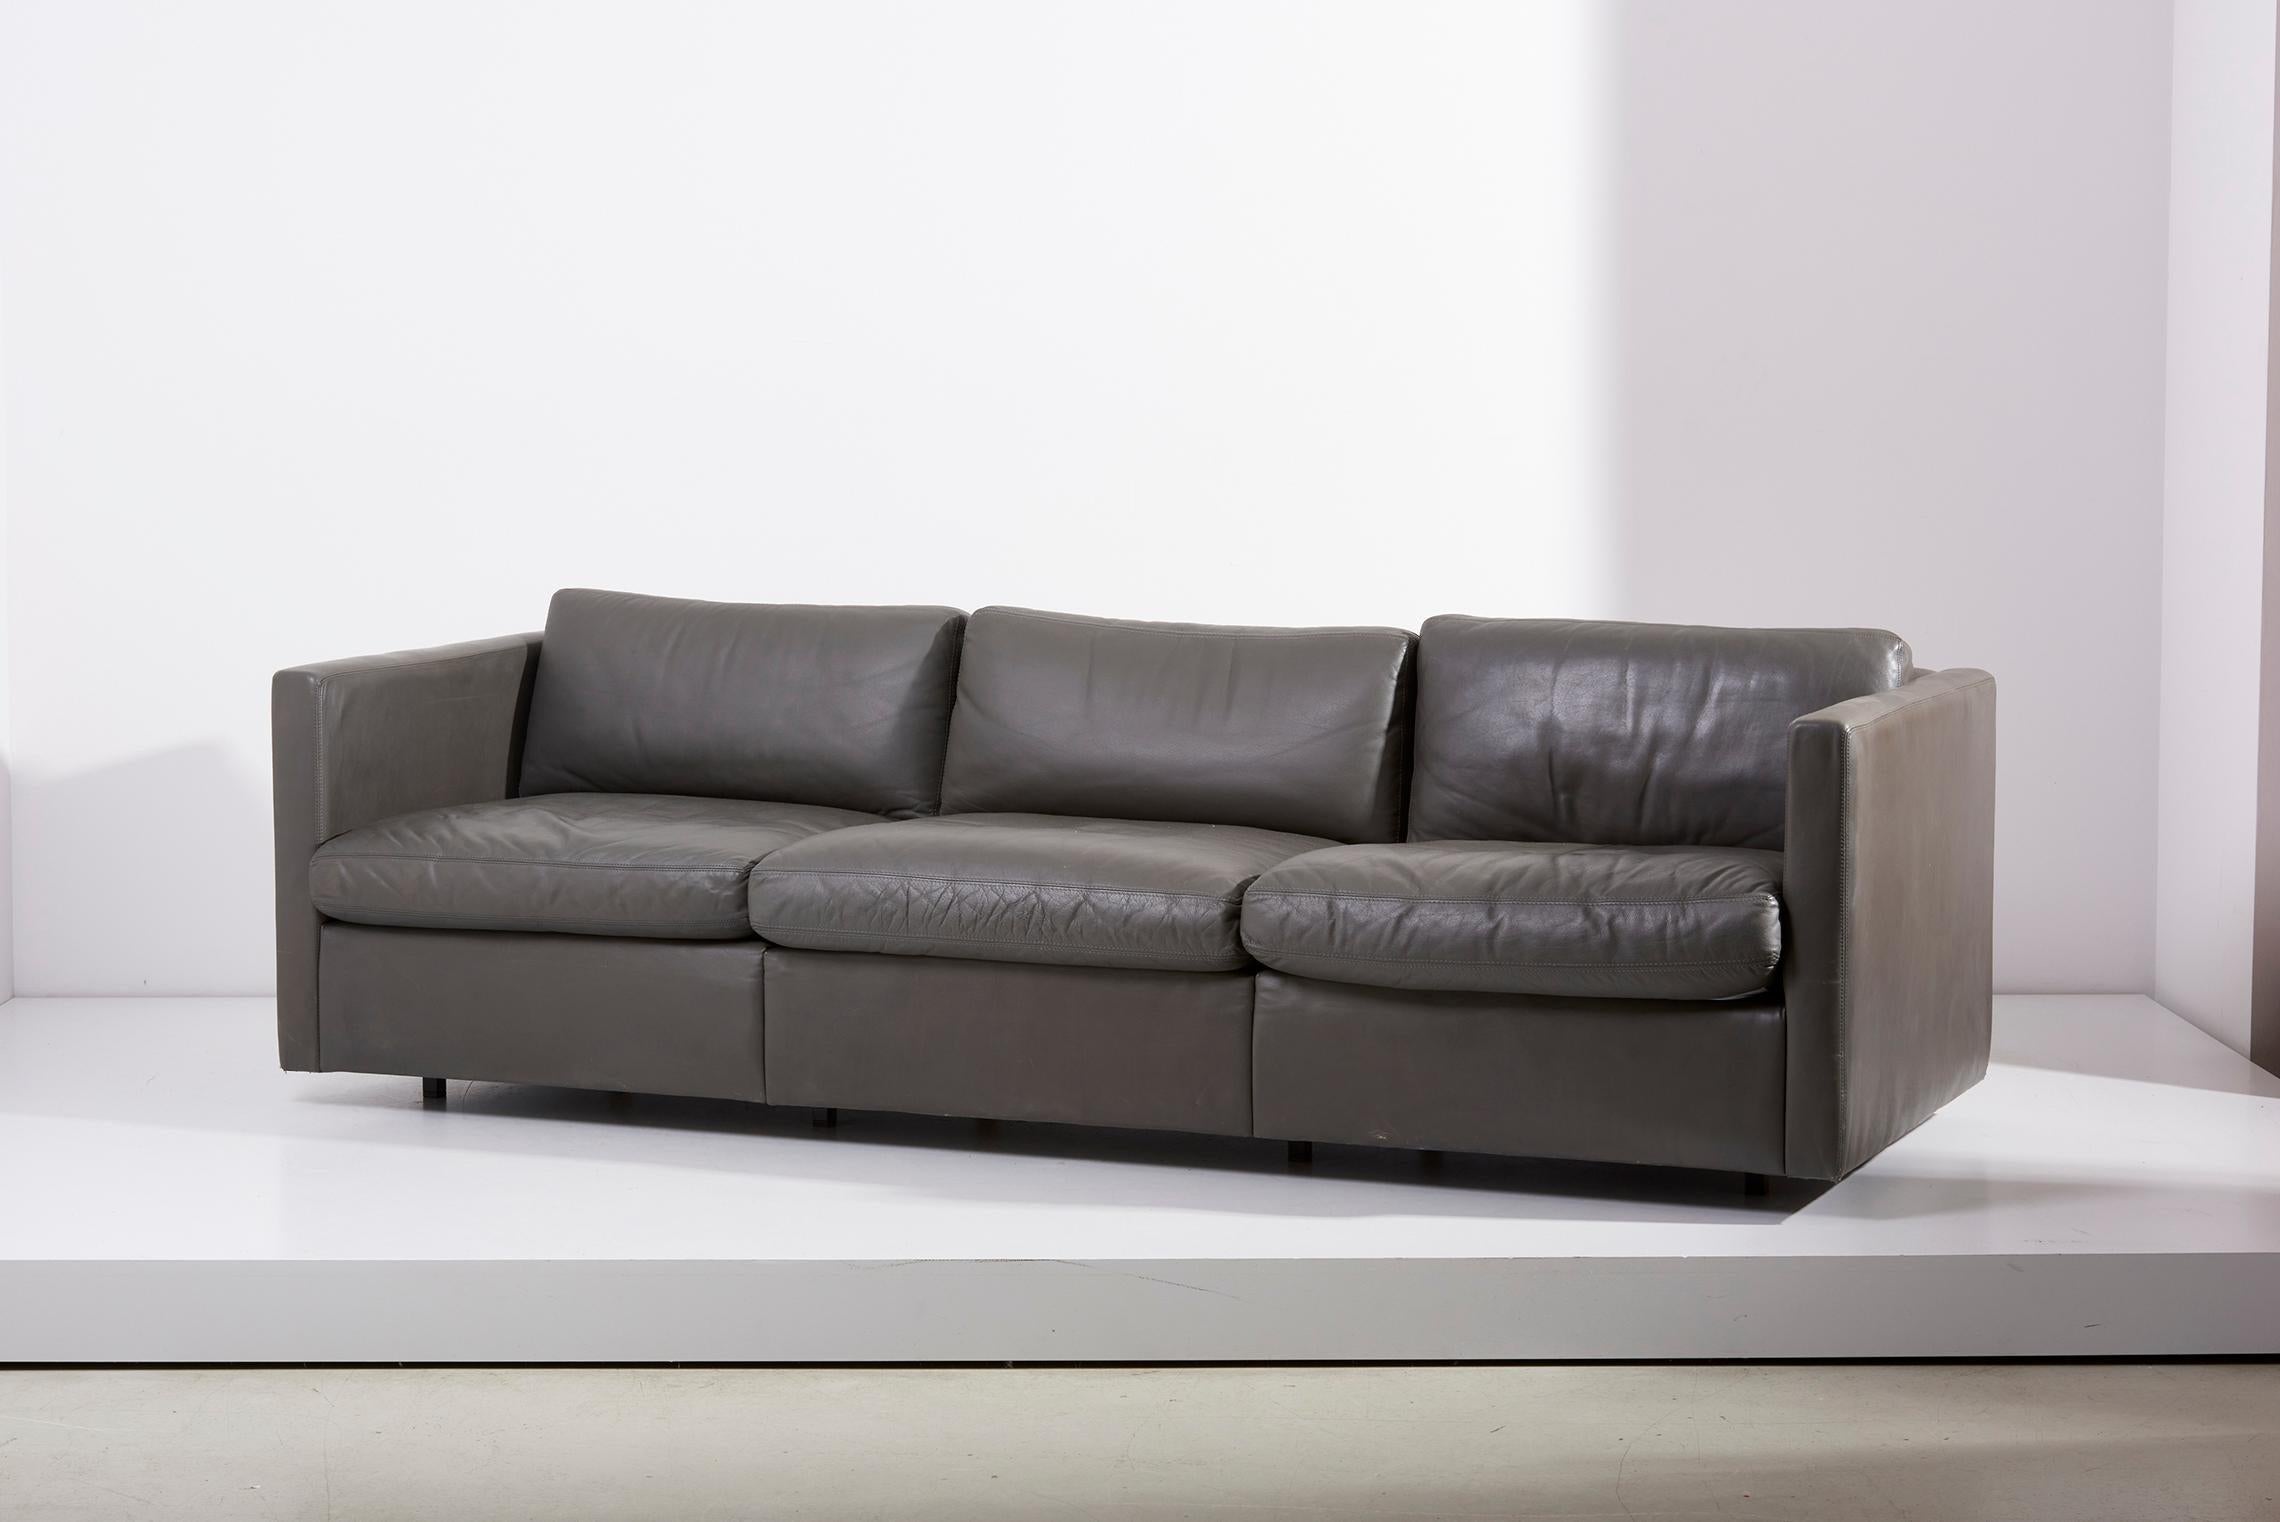 A original three-seat leather sofa design in 1971 by Charles Pfister for Knoll. Original grey color Knoll leather. Overall dimensions: 86” wide, 33” deep, 29” high, 16” seat, 24” arm height.
Size of the lounge chairs is in the listing.